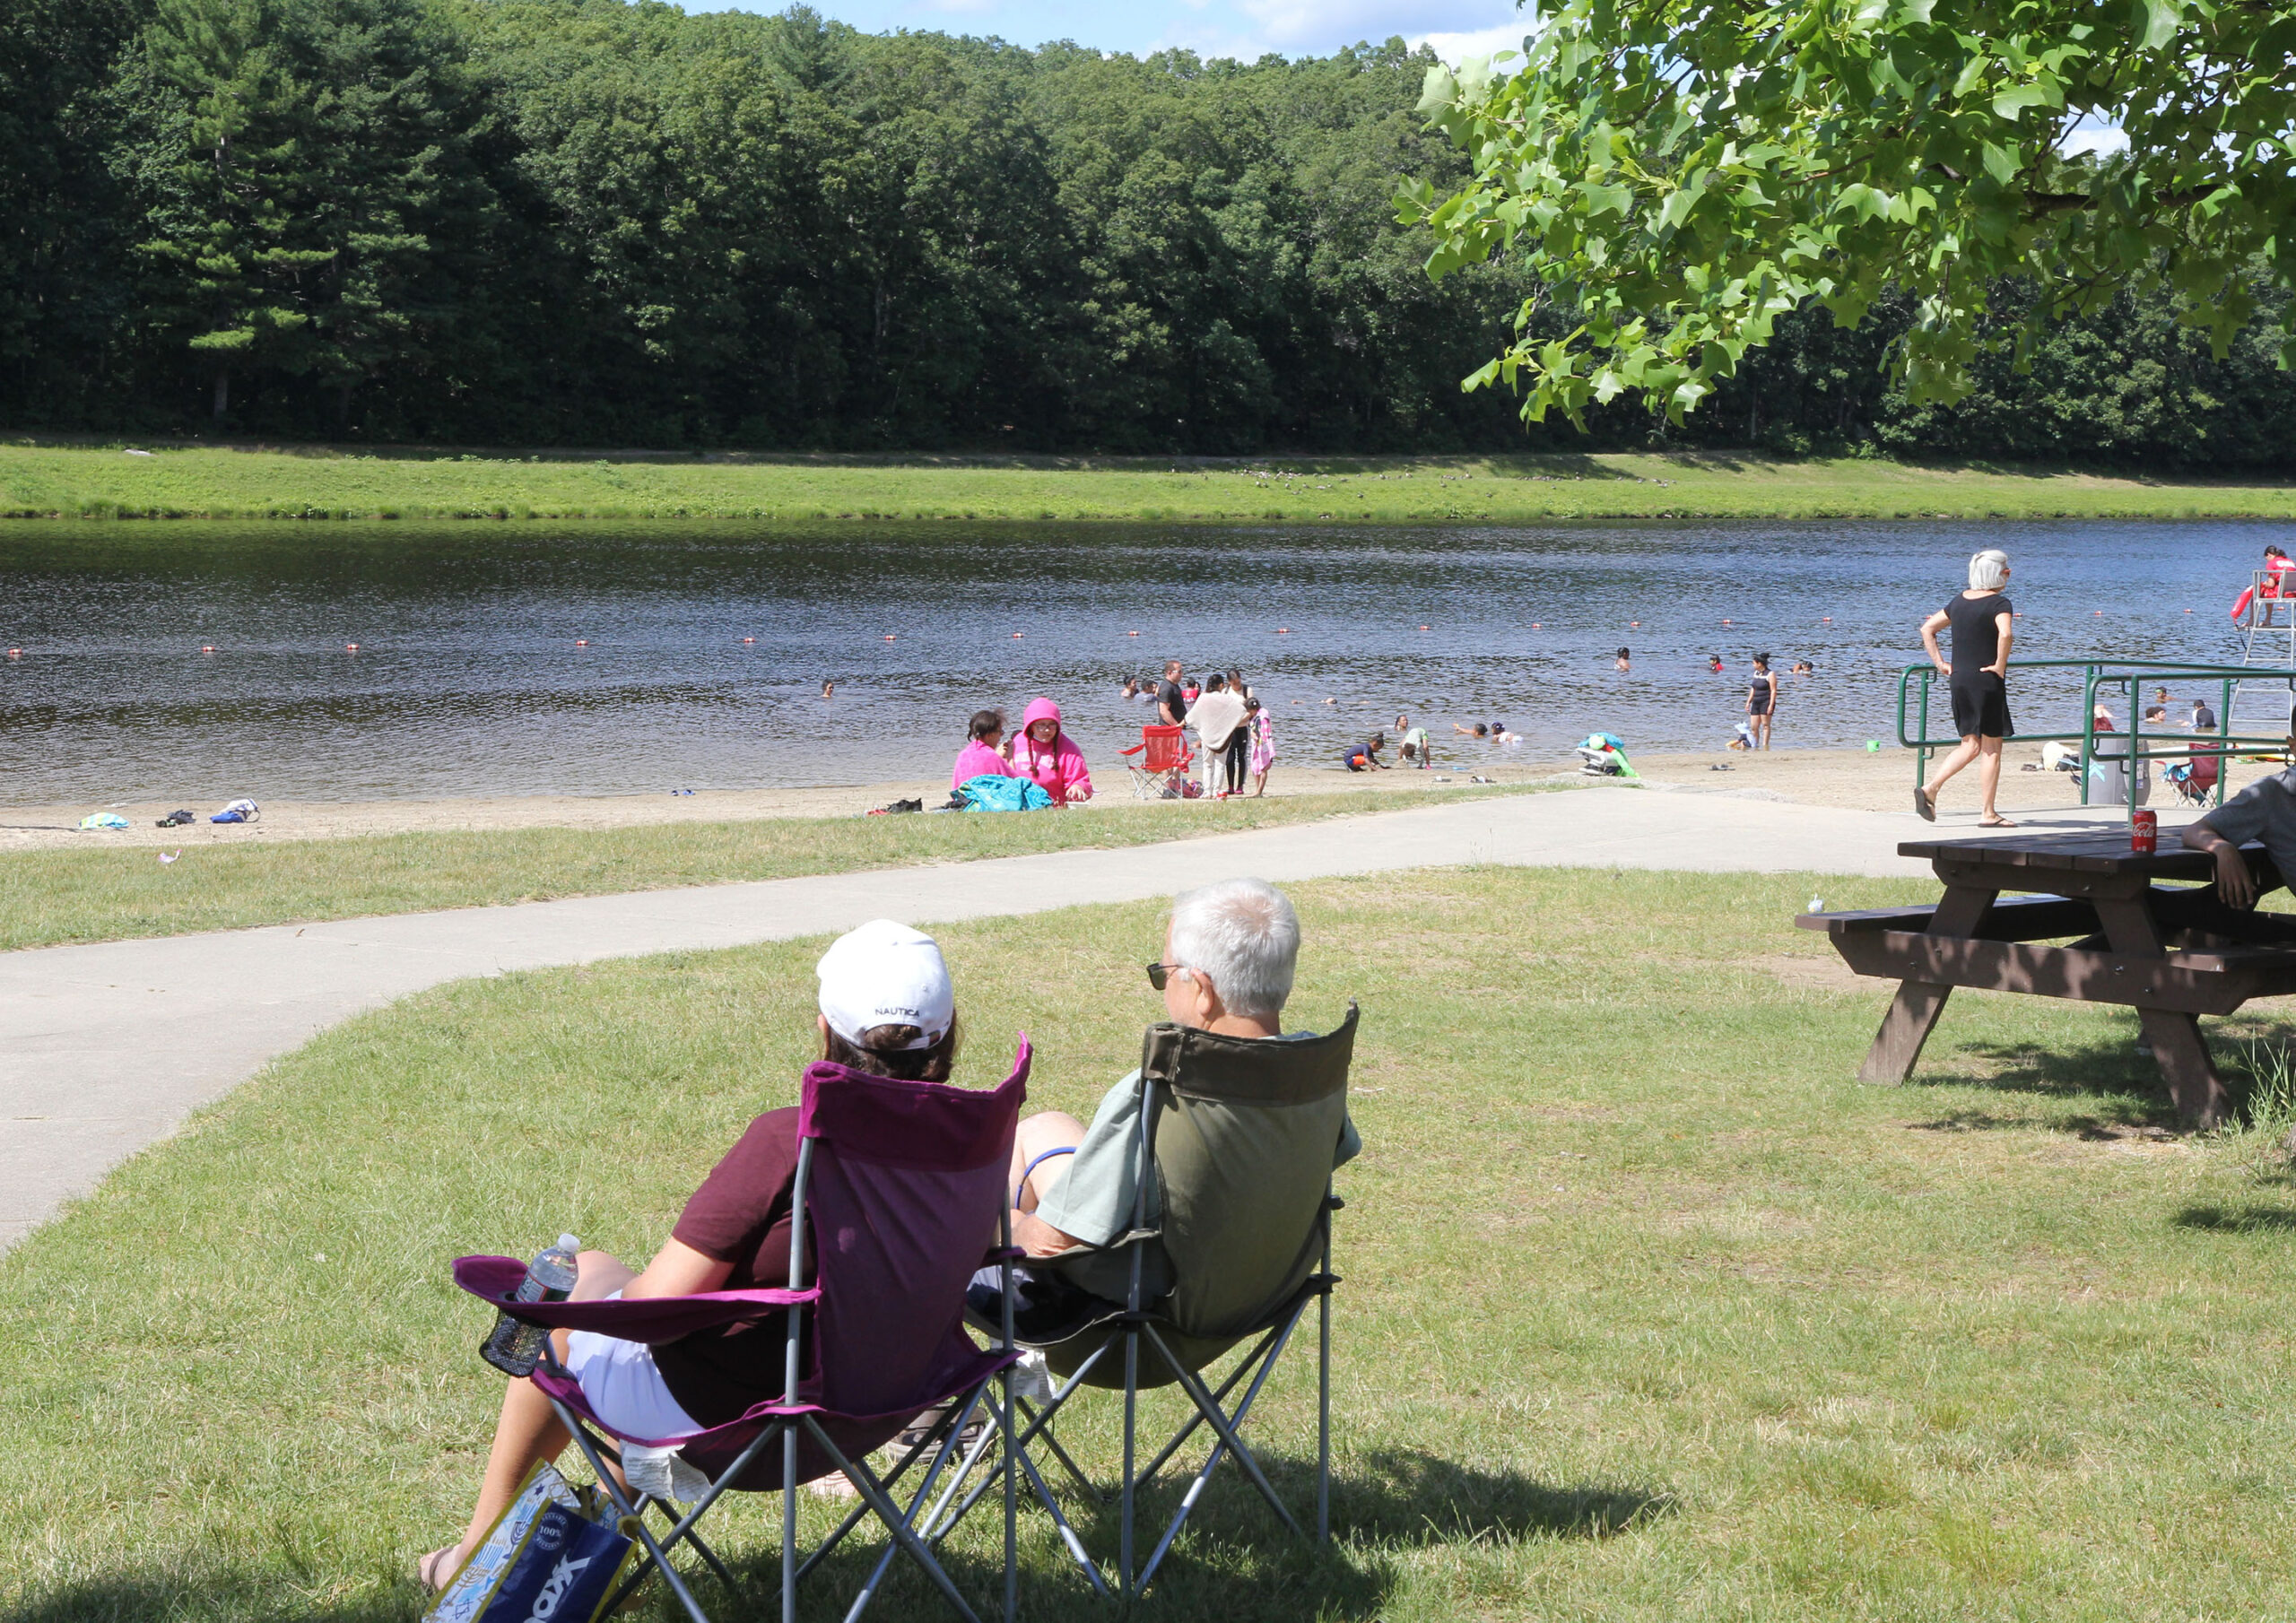 Hopkinton State Park beaches closed due to poor water quality